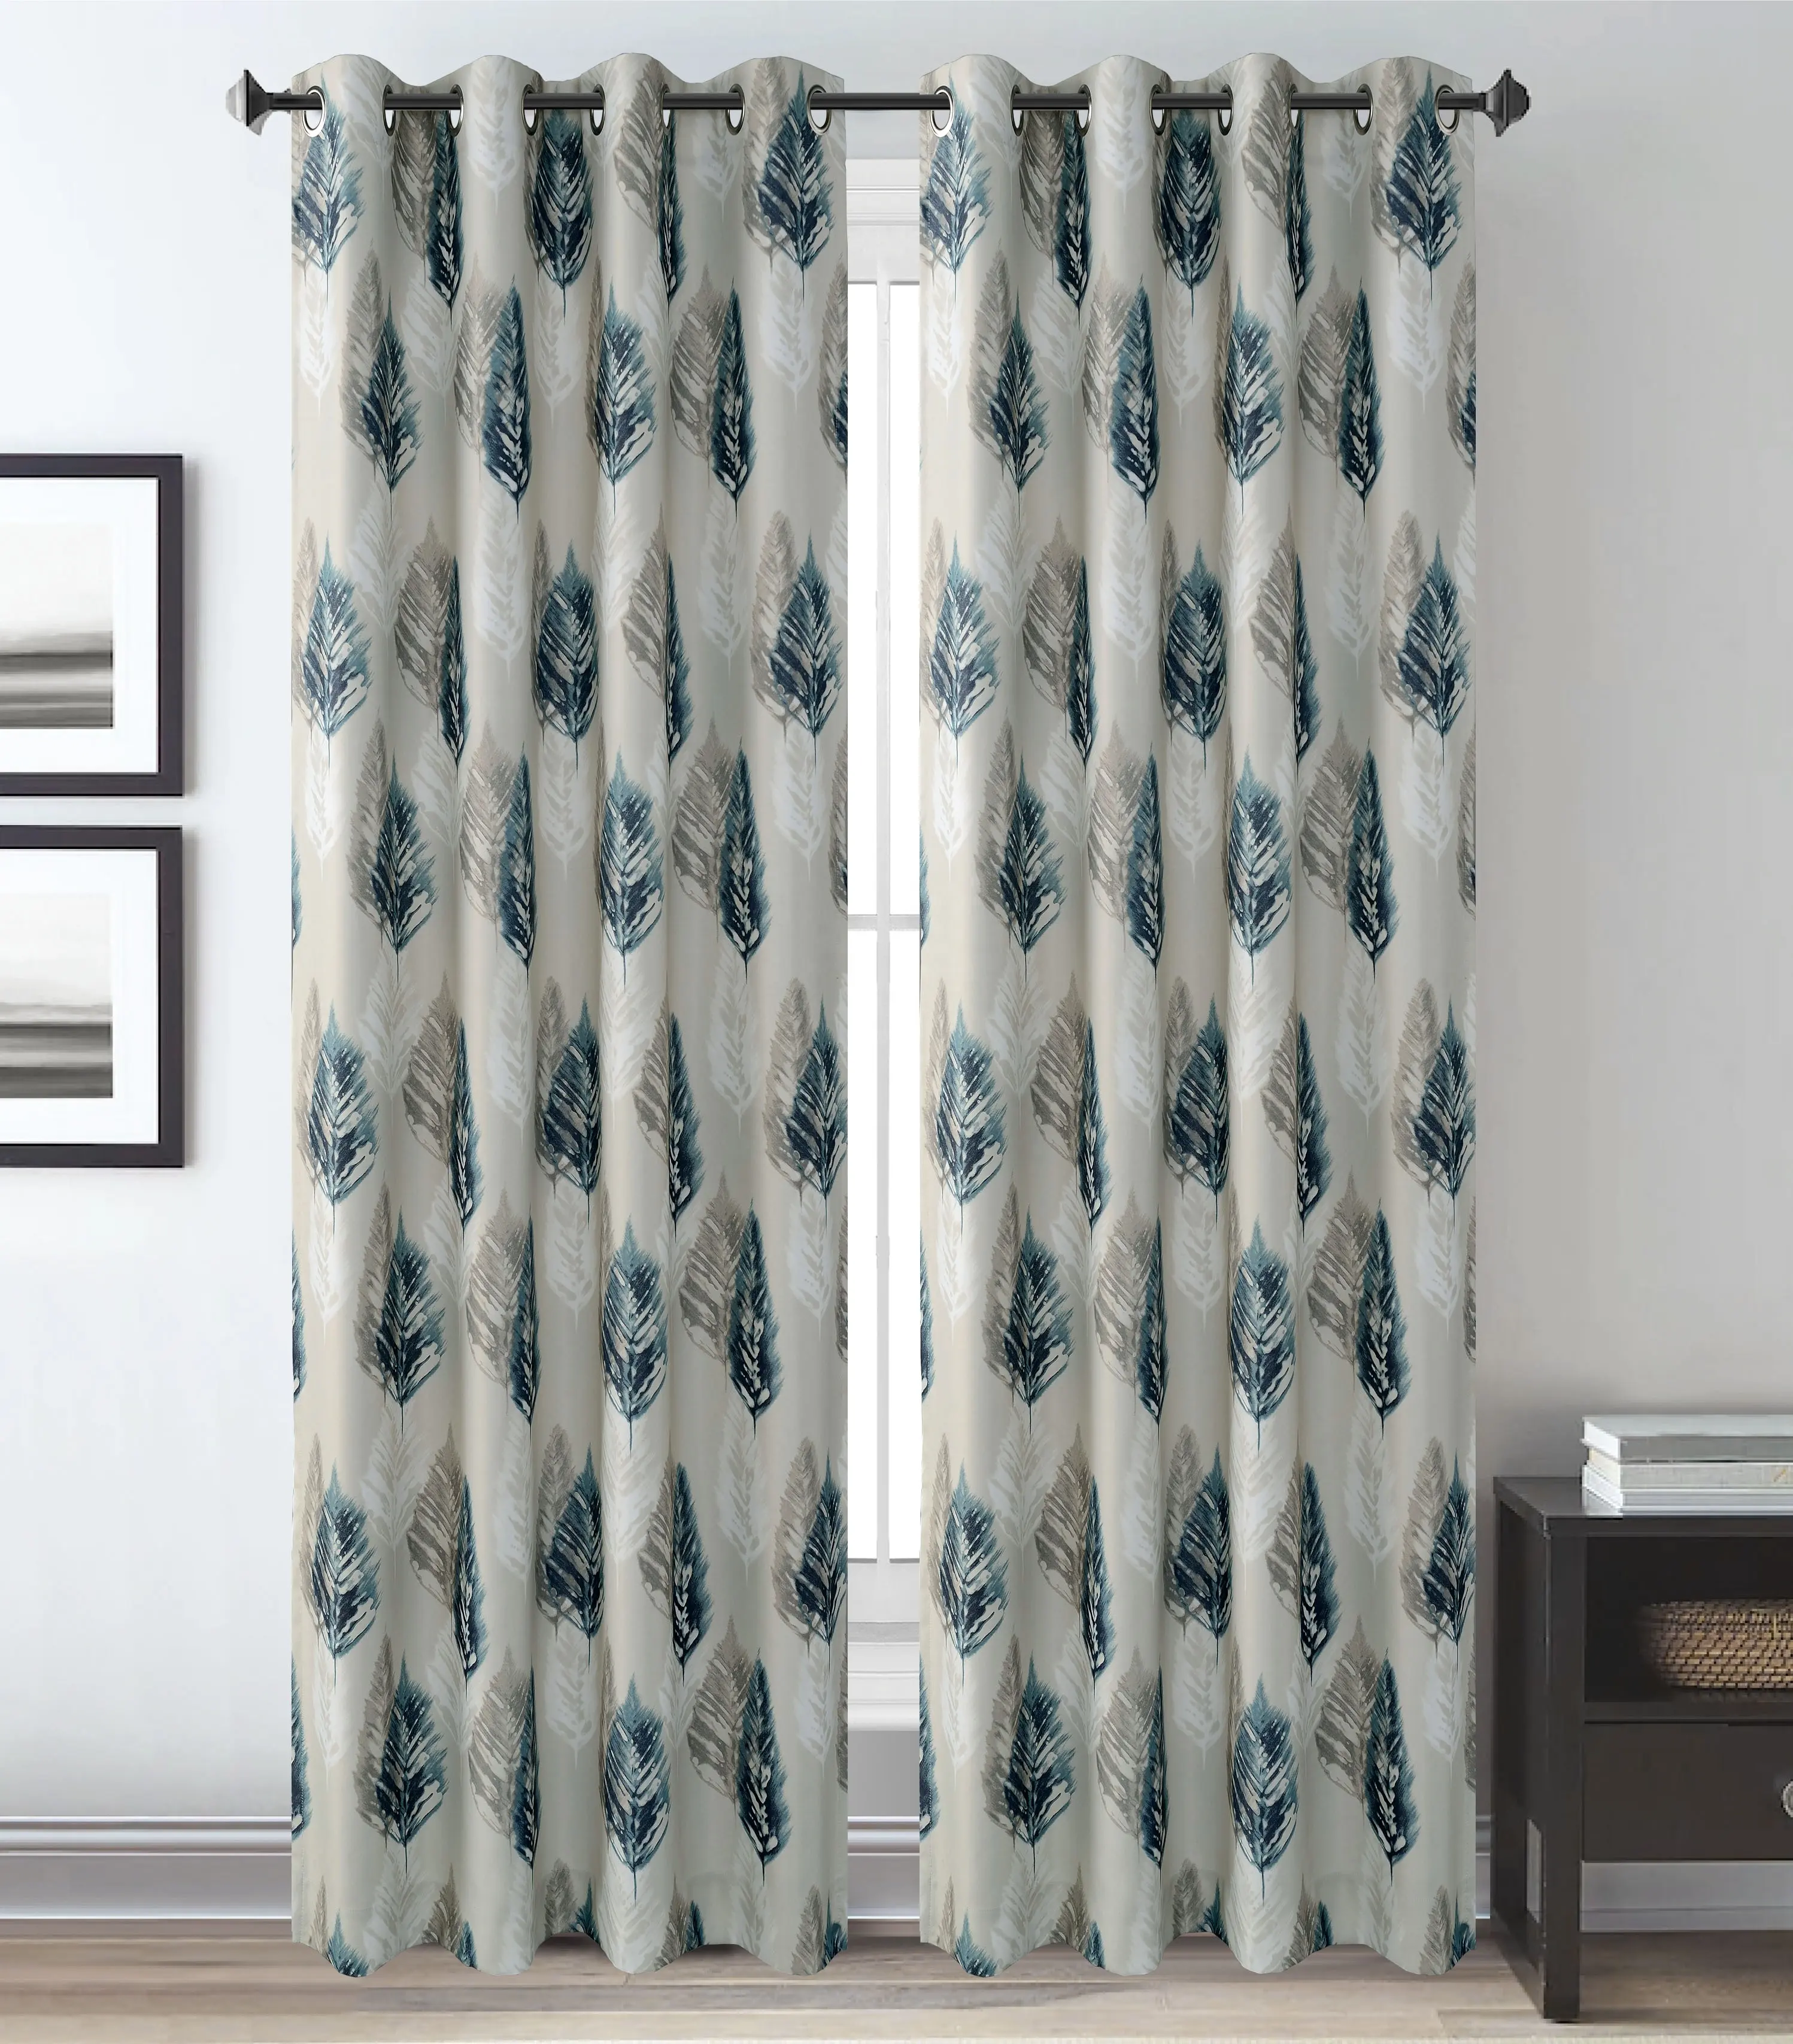 Blackout Curtains Pattern Room Darkening Thermal Insulated Panels Energy Saving Drapes for Bedroom Print Bay Window Grommet 500m